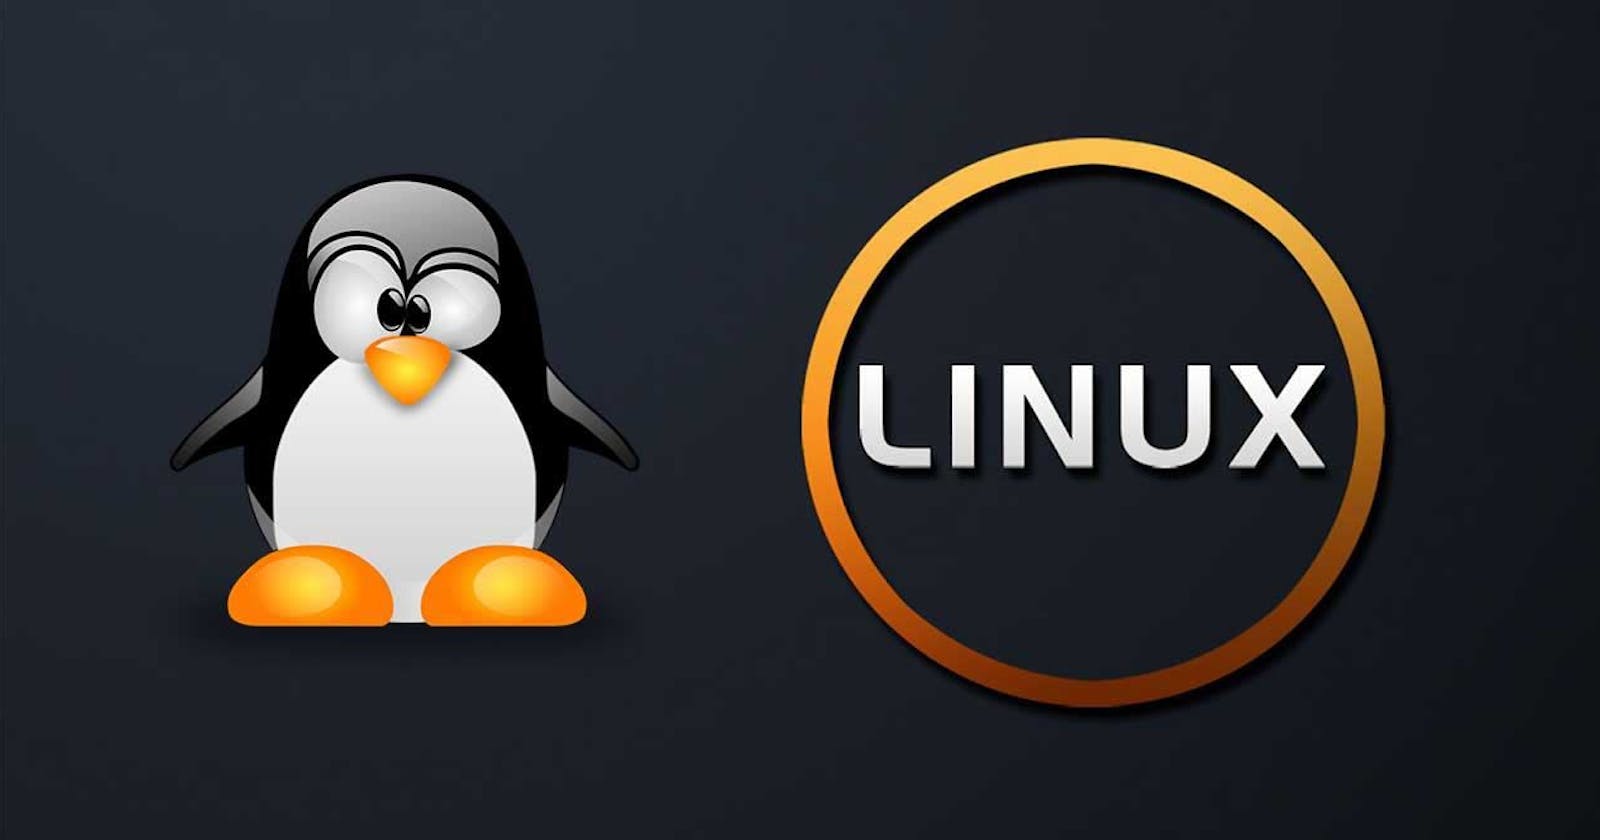 Diving into the concepts of Linux